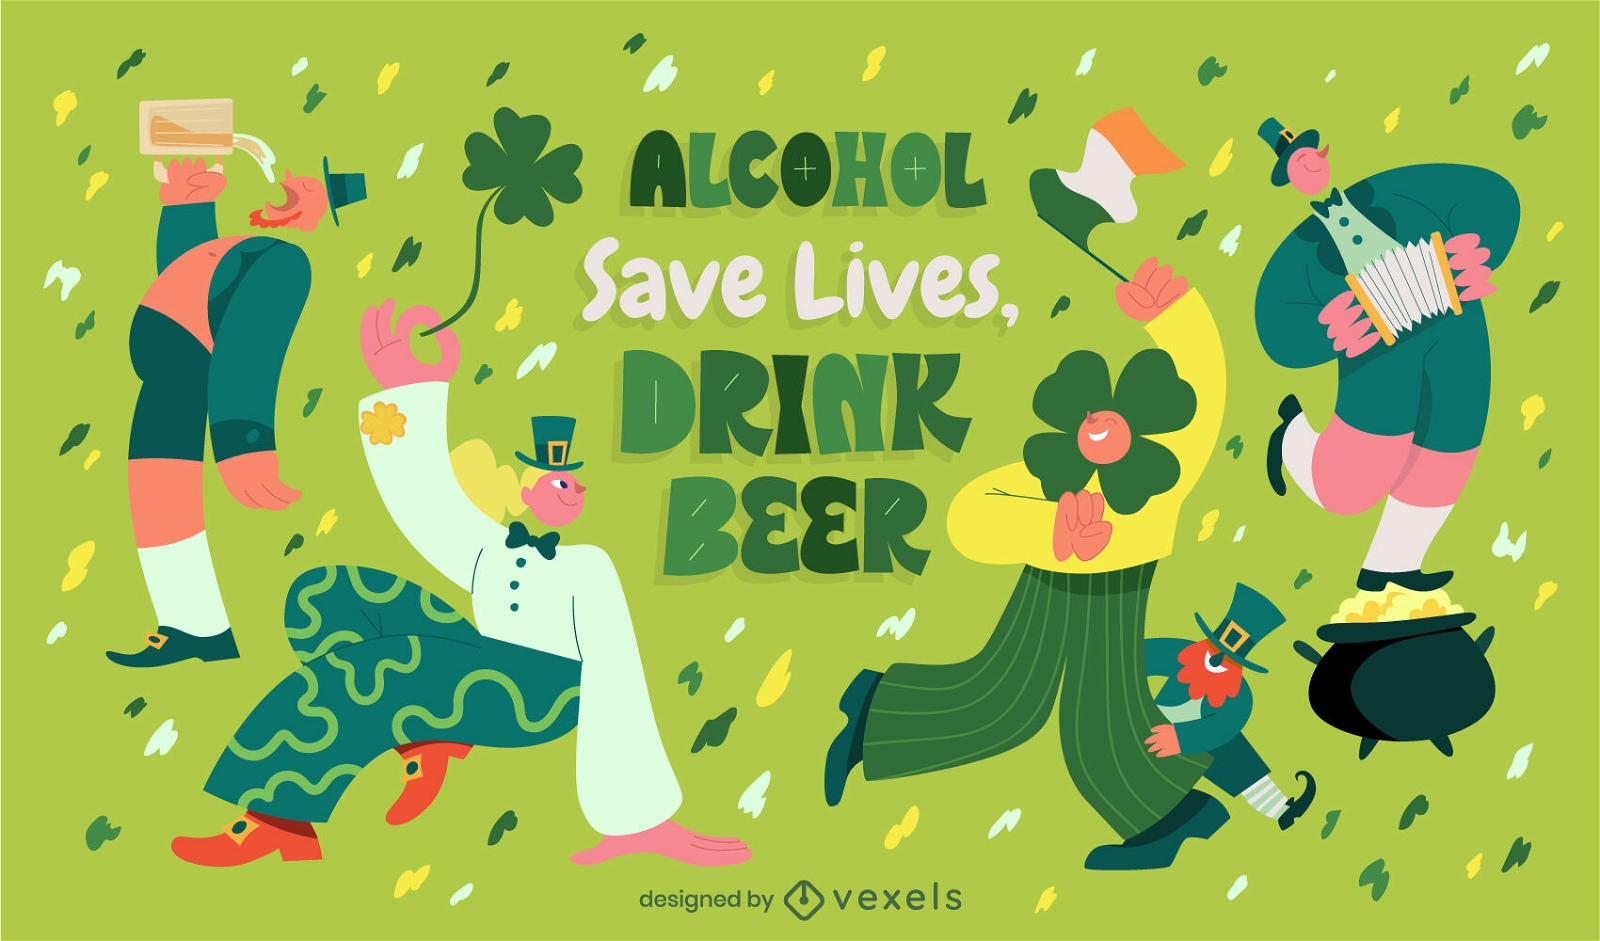 Alcohol and beer quote illustration design